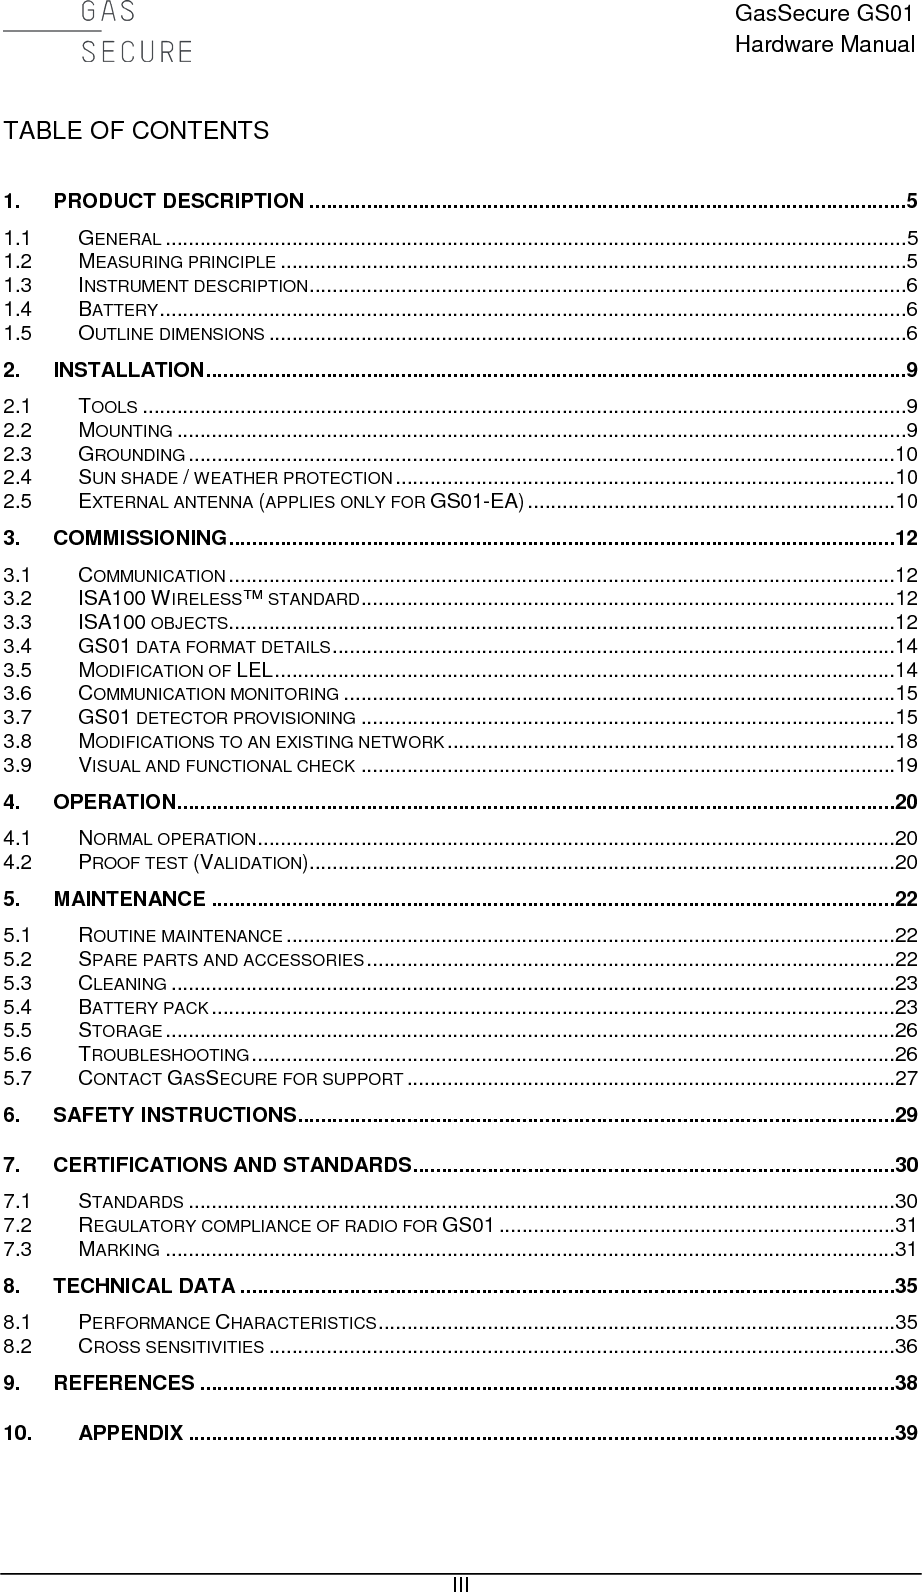  GasSecure GS01 Hardware Manual   III TABLE OF CONTENTS  1. PRODUCT DESCRIPTION ........................................................................................................5 1.1 GENERAL .................................................................................................................................5 1.2 MEASURING PRINCIPLE .............................................................................................................5 1.3 INSTRUMENT DESCRIPTION ........................................................................................................6 1.4 BATTERY ..................................................................................................................................6 1.5 OUTLINE DIMENSIONS ...............................................................................................................6 2. INSTALLATION ..........................................................................................................................9 2.1 TOOLS .....................................................................................................................................9 2.2 MOUNTING ...............................................................................................................................9 2.3 GROUNDING ...........................................................................................................................10 2.4 SUN SHADE / WEATHER PROTECTION .......................................................................................10 2.5 EXTERNAL ANTENNA (APPLIES ONLY FOR GS01-EA) ................................................................10 3. COMMISSIONING ....................................................................................................................12 3.1 COMMUNICATION ....................................................................................................................12 3.2 ISA100 WIRELESS™ STANDARD .............................................................................................12 3.3 ISA100 OBJECTS ....................................................................................................................12 3.4 GS01 DATA FORMAT DETAILS ..................................................................................................14 3.5 MODIFICATION OF LEL ............................................................................................................14 3.6 COMMUNICATION MONITORING ................................................................................................15 3.7 GS01 DETECTOR PROVISIONING .............................................................................................15 3.8 MODIFICATIONS TO AN EXISTING NETWORK ..............................................................................18 3.9 VISUAL AND FUNCTIONAL CHECK .............................................................................................19 4. OPERATION .............................................................................................................................20 4.1 NORMAL OPERATION ...............................................................................................................20 4.2 PROOF TEST (VALIDATION)......................................................................................................20 5. MAINTENANCE .......................................................................................................................22 5.1 ROUTINE MAINTENANCE ..........................................................................................................22 5.2 SPARE PARTS AND ACCESSORIES ............................................................................................22 5.3 CLEANING ..............................................................................................................................23 5.4 BATTERY PACK .......................................................................................................................23 5.5 STORAGE ...............................................................................................................................26 5.6 TROUBLESHOOTING ................................................................................................................26 5.7 CONTACT GASSECURE FOR SUPPORT .....................................................................................27 6. SAFETY INSTRUCTIONS ........................................................................................................29 7. CERTIFICATIONS AND STANDARDS ....................................................................................30 7.1 STANDARDS ...........................................................................................................................30 7.2 REGULATORY COMPLIANCE OF RADIO FOR GS01 .....................................................................31 7.3 MARKING ...............................................................................................................................31 8. TECHNICAL DATA ..................................................................................................................35 8.1 PERFORMANCE CHARACTERISTICS ..........................................................................................35 8.2 CROSS SENSITIVITIES .............................................................................................................36 9. REFERENCES .........................................................................................................................38 10. APPENDIX ...........................................................................................................................39   